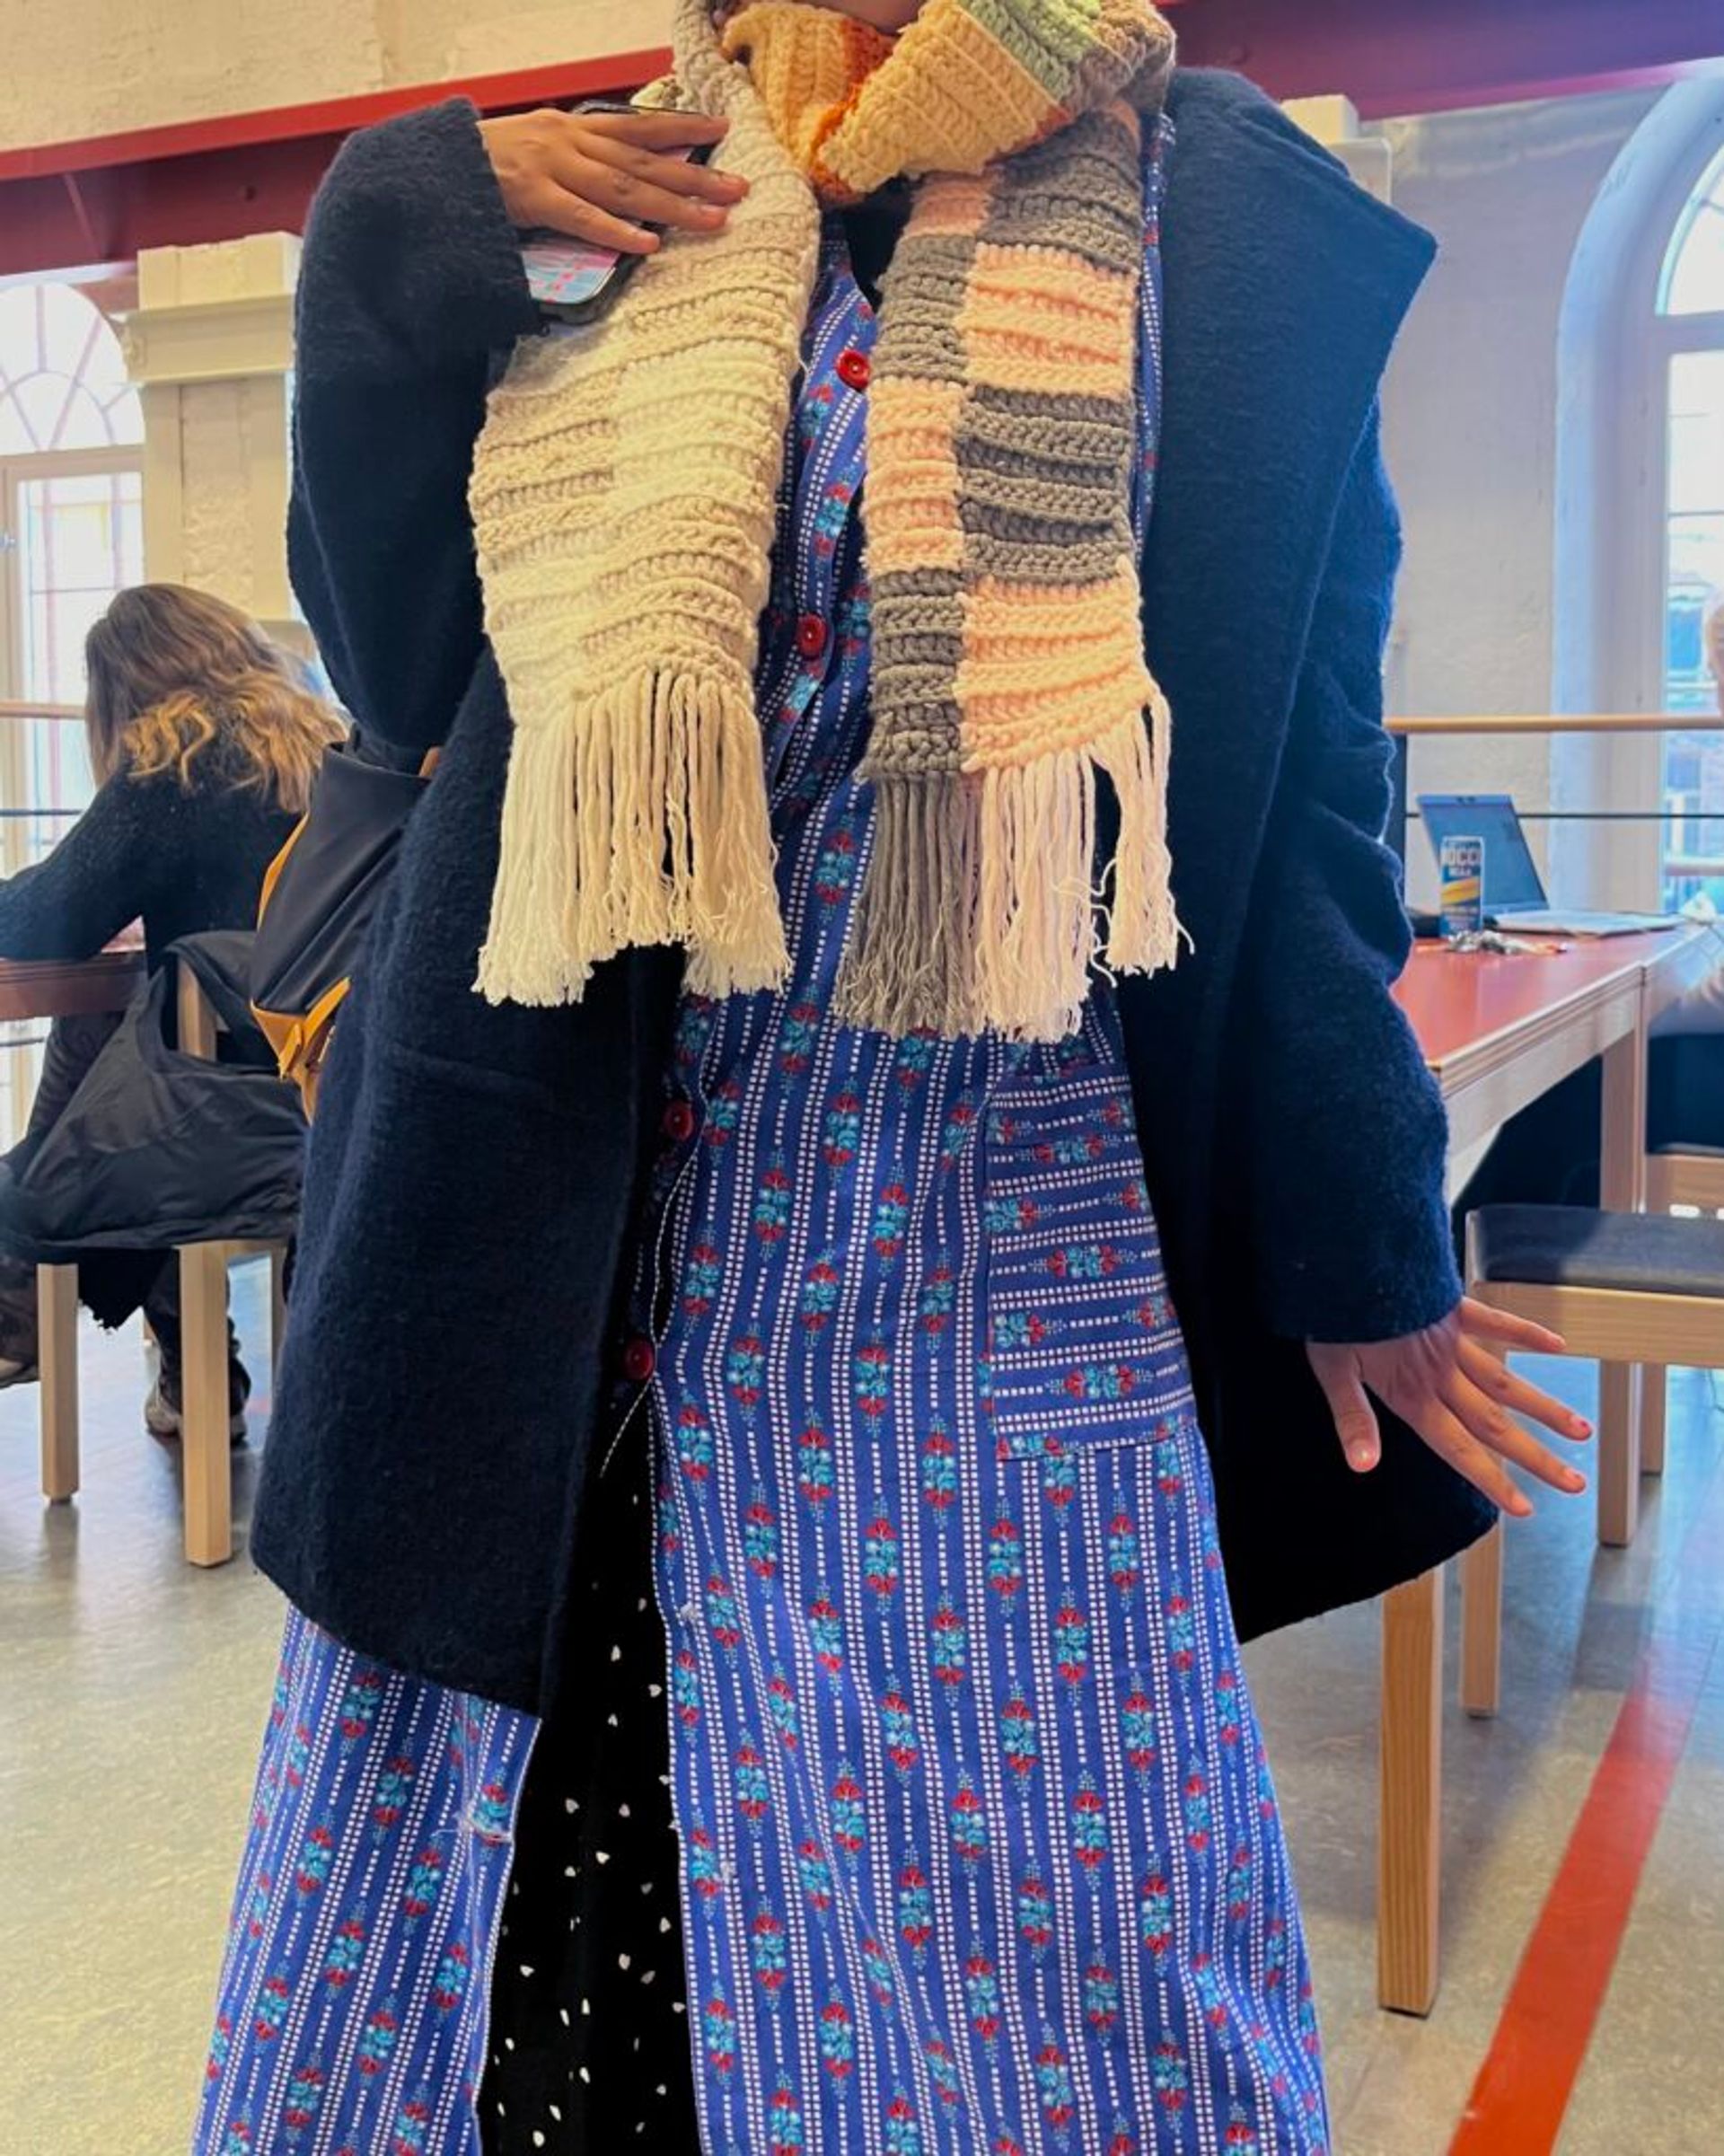 International student with colourful layered outfits in the campus library